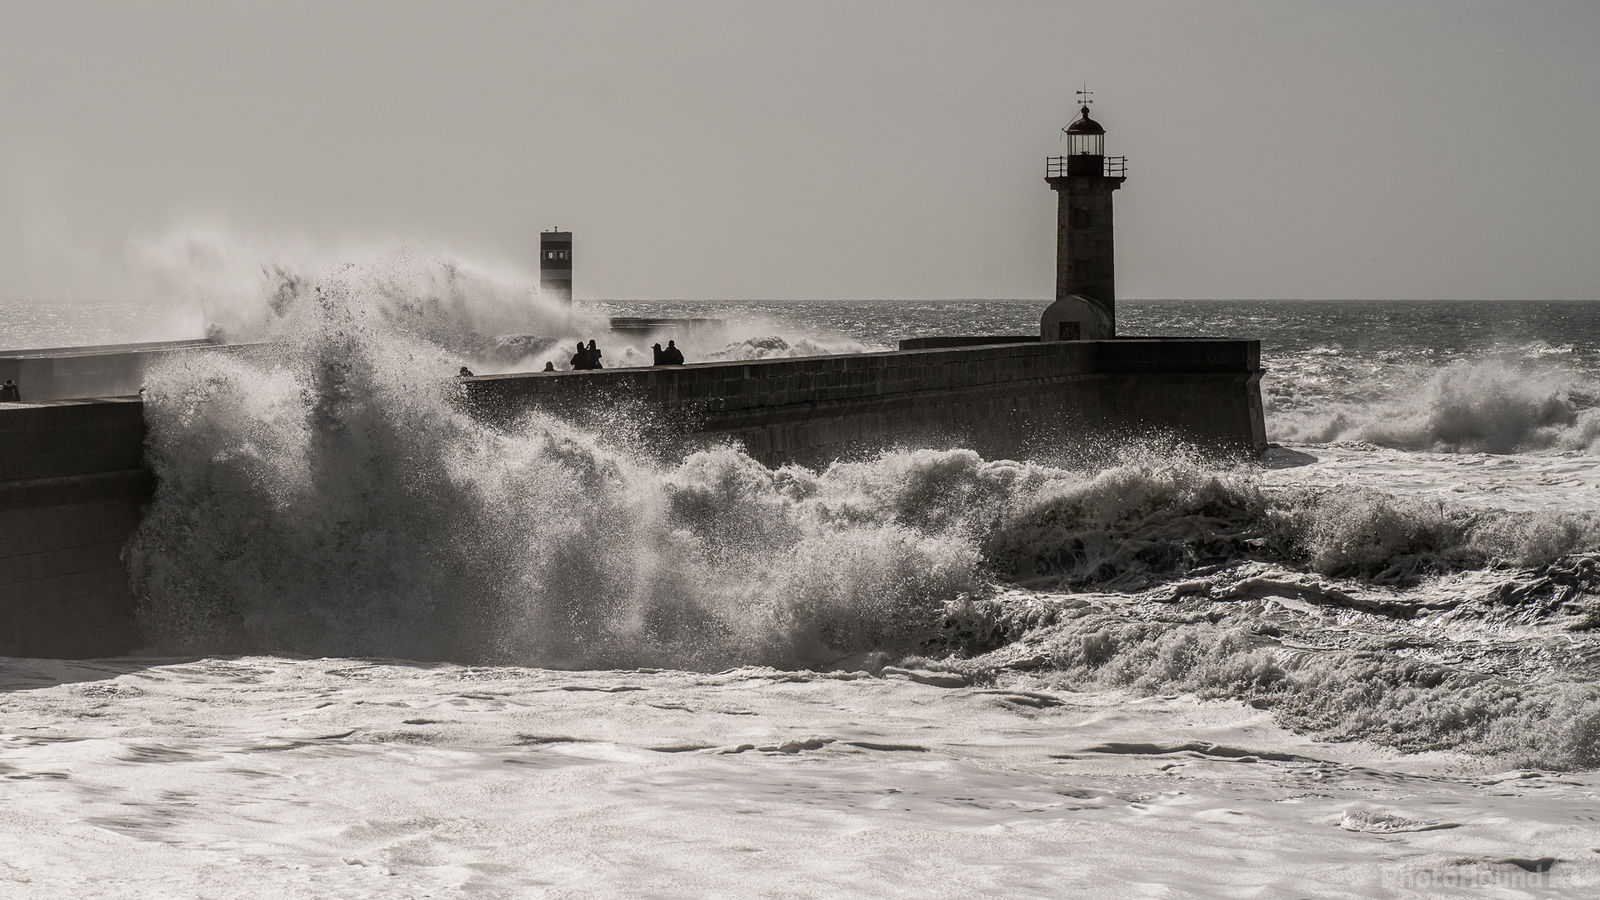 Image of Sea defences of the Douro River by James Billings.